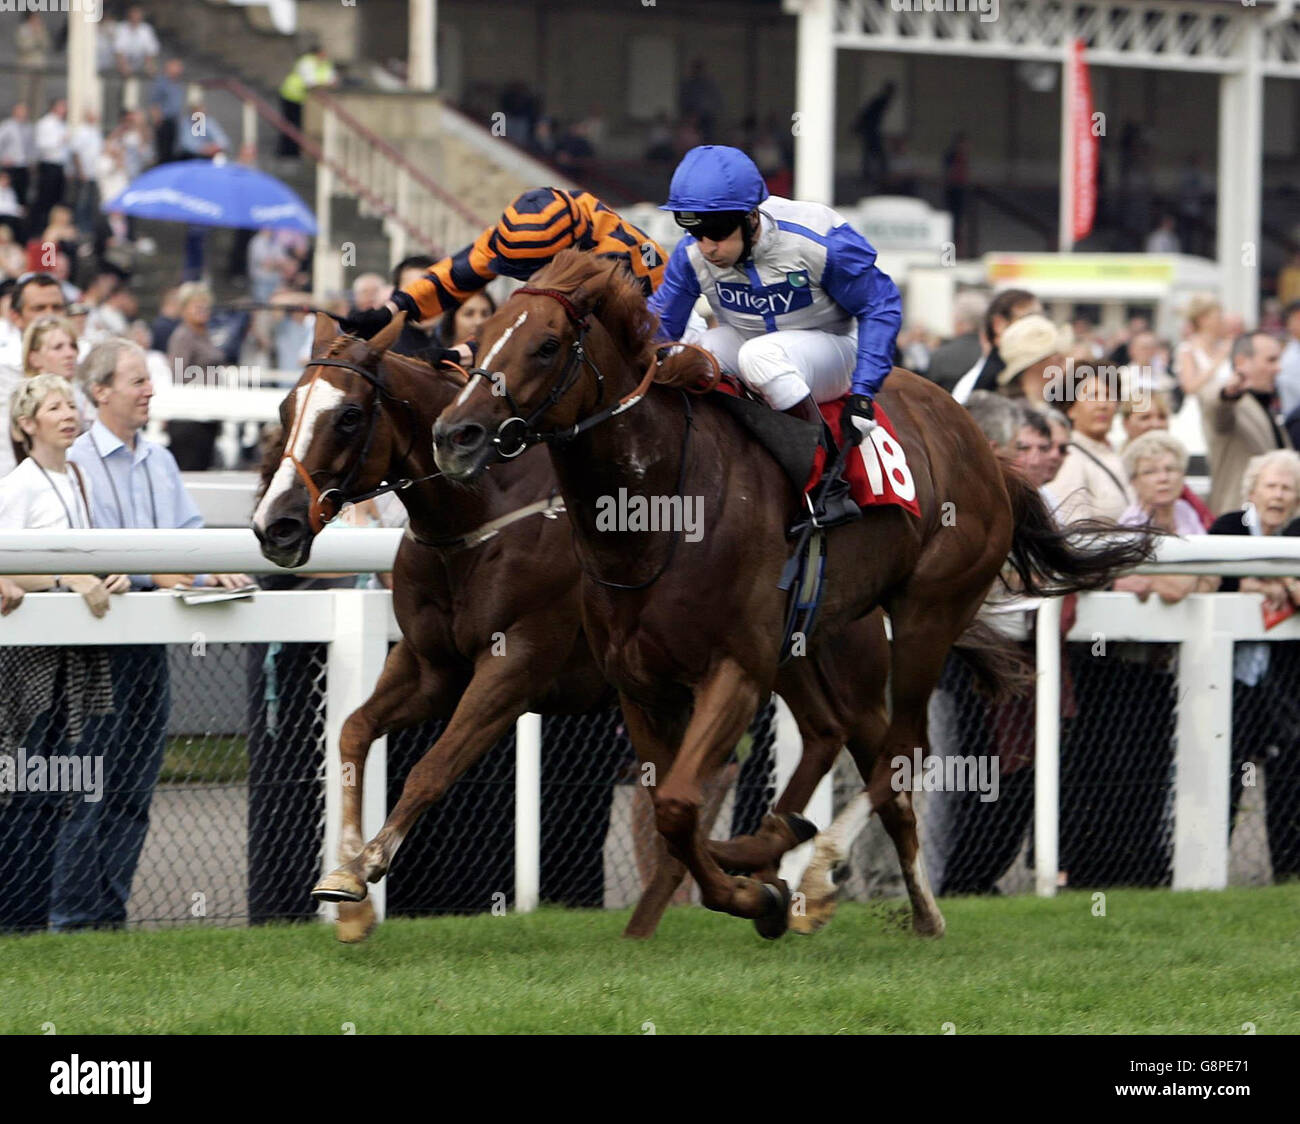 Reverence ridden by Kevin Darley (R) wins the Community Union Representing Betting Shop Staff Handicap at Doncaster racecourse, Friday September 9, 2005. PRESS ASSOCIATION Photo. Photo credit should read: Steve Parkin/PA. Stock Photo